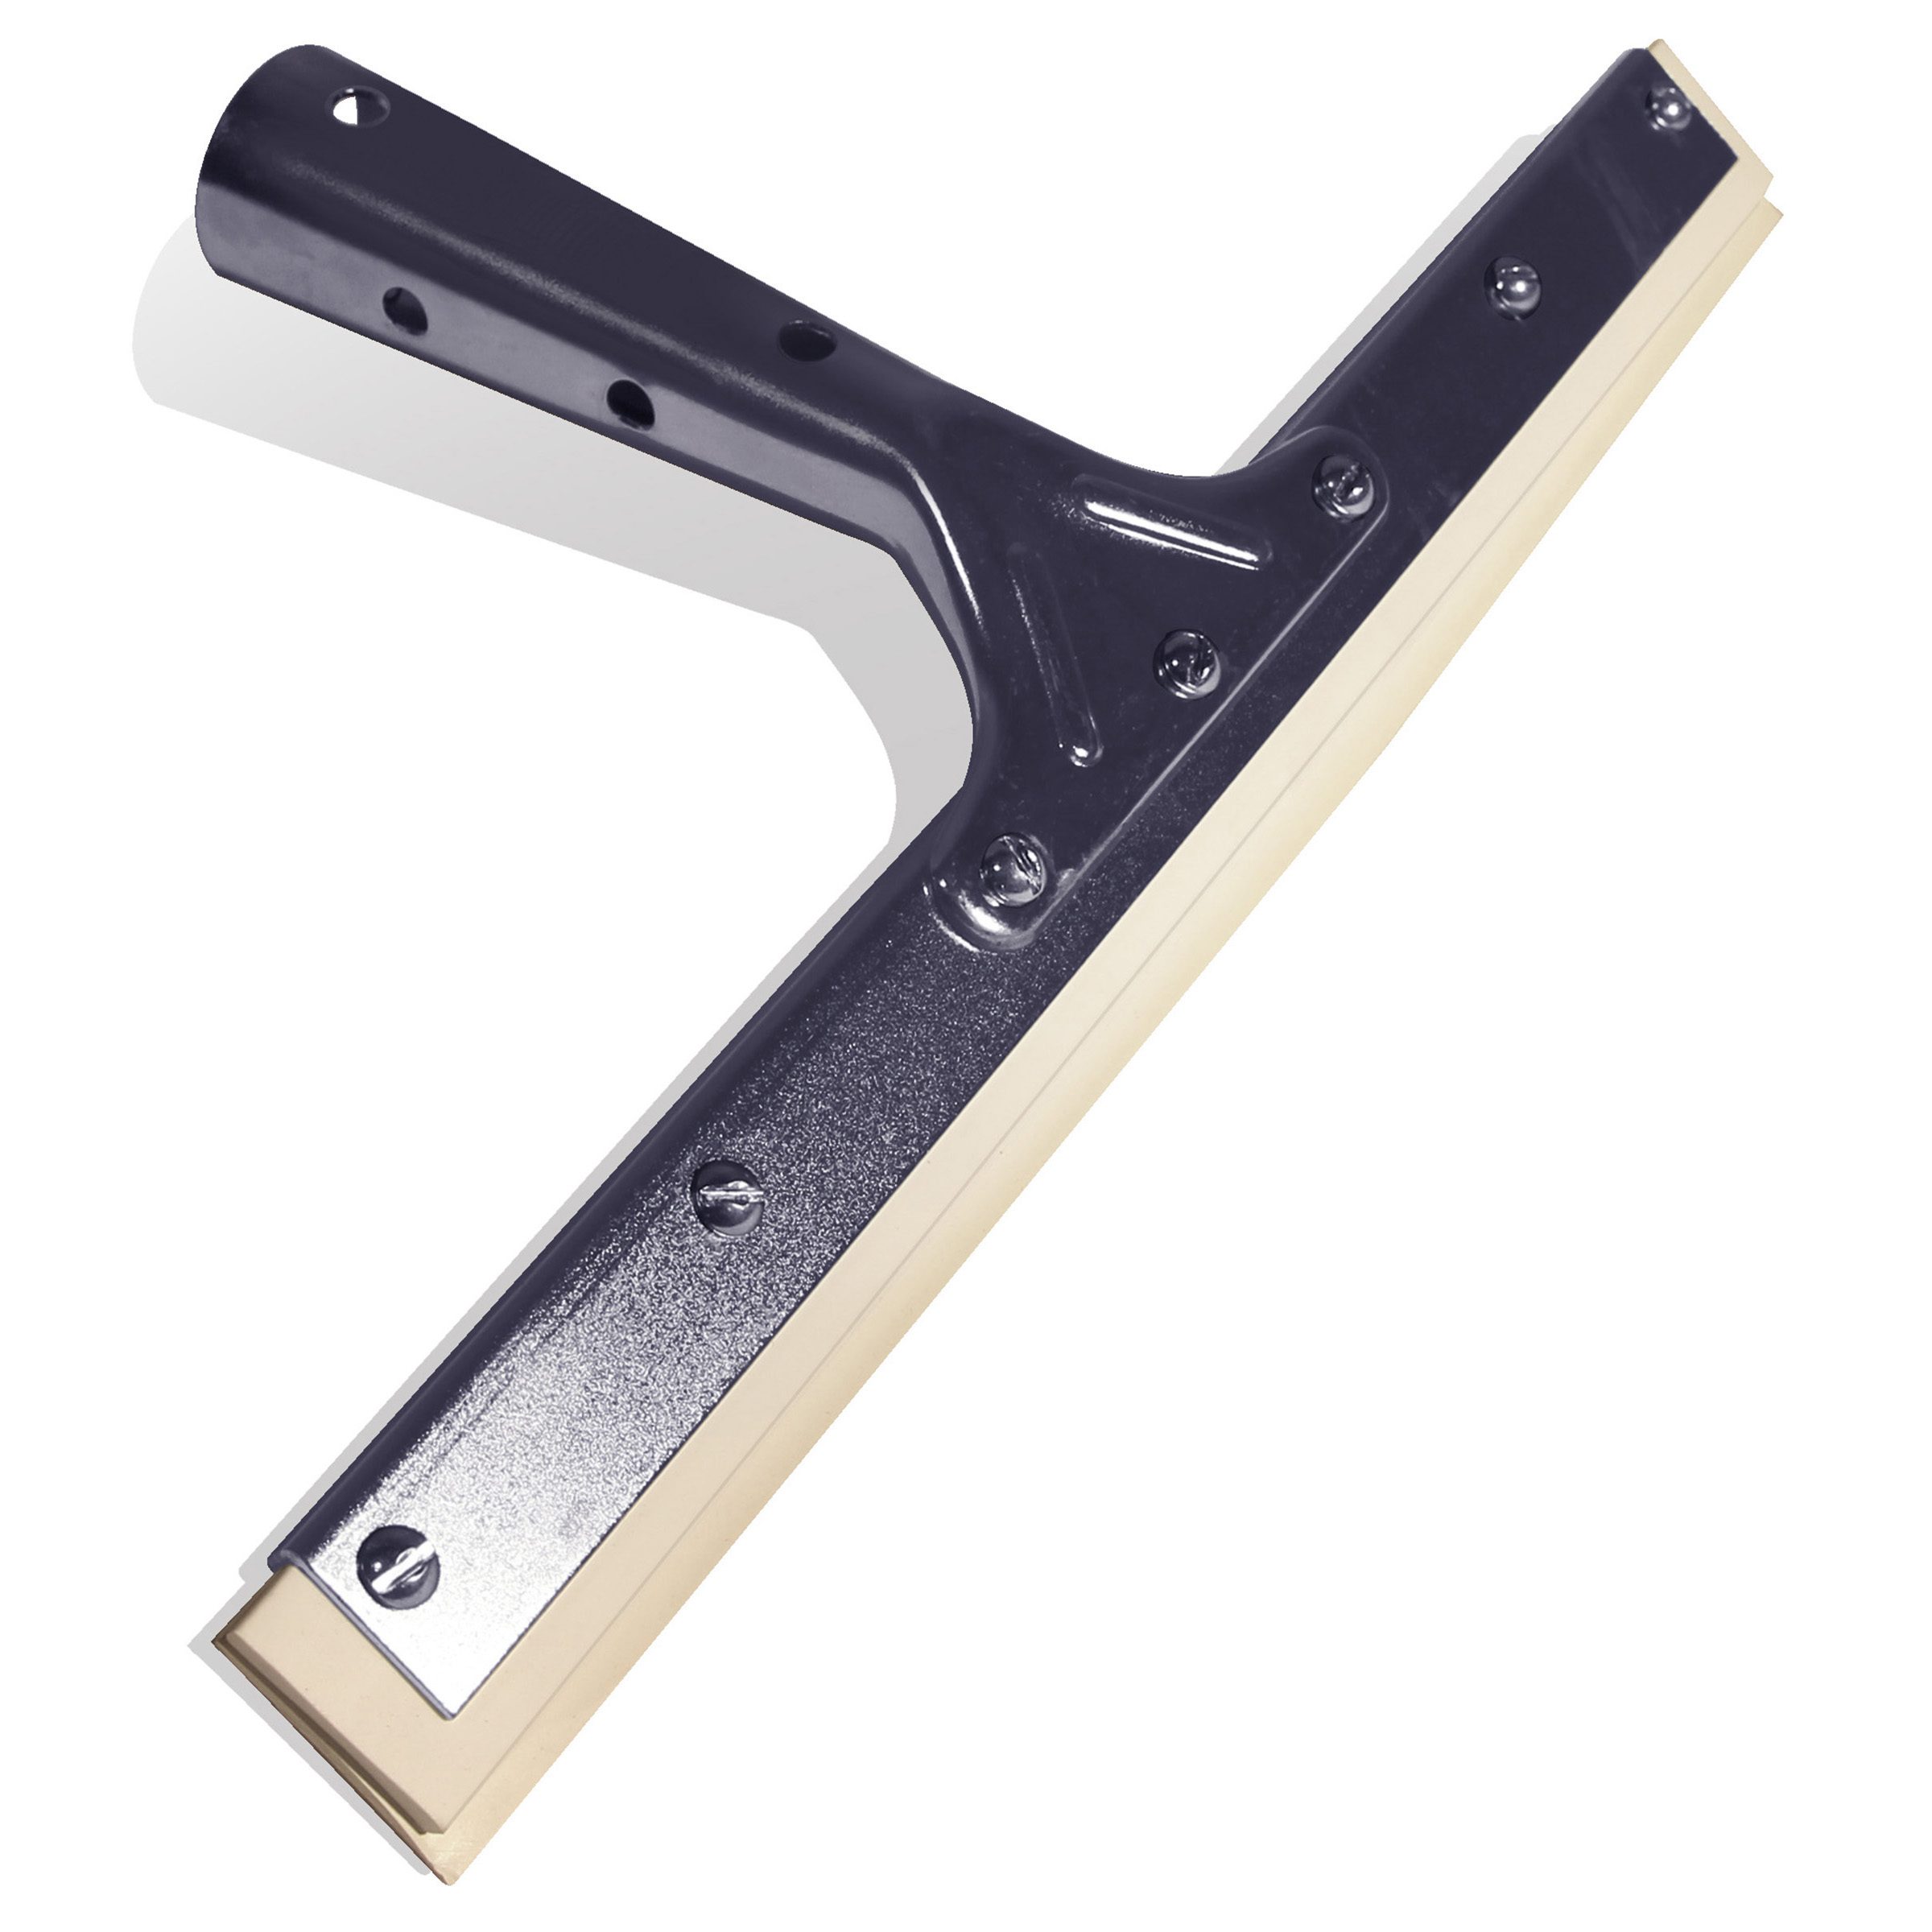 18 Speed Squeegee®, 8-12 Mil